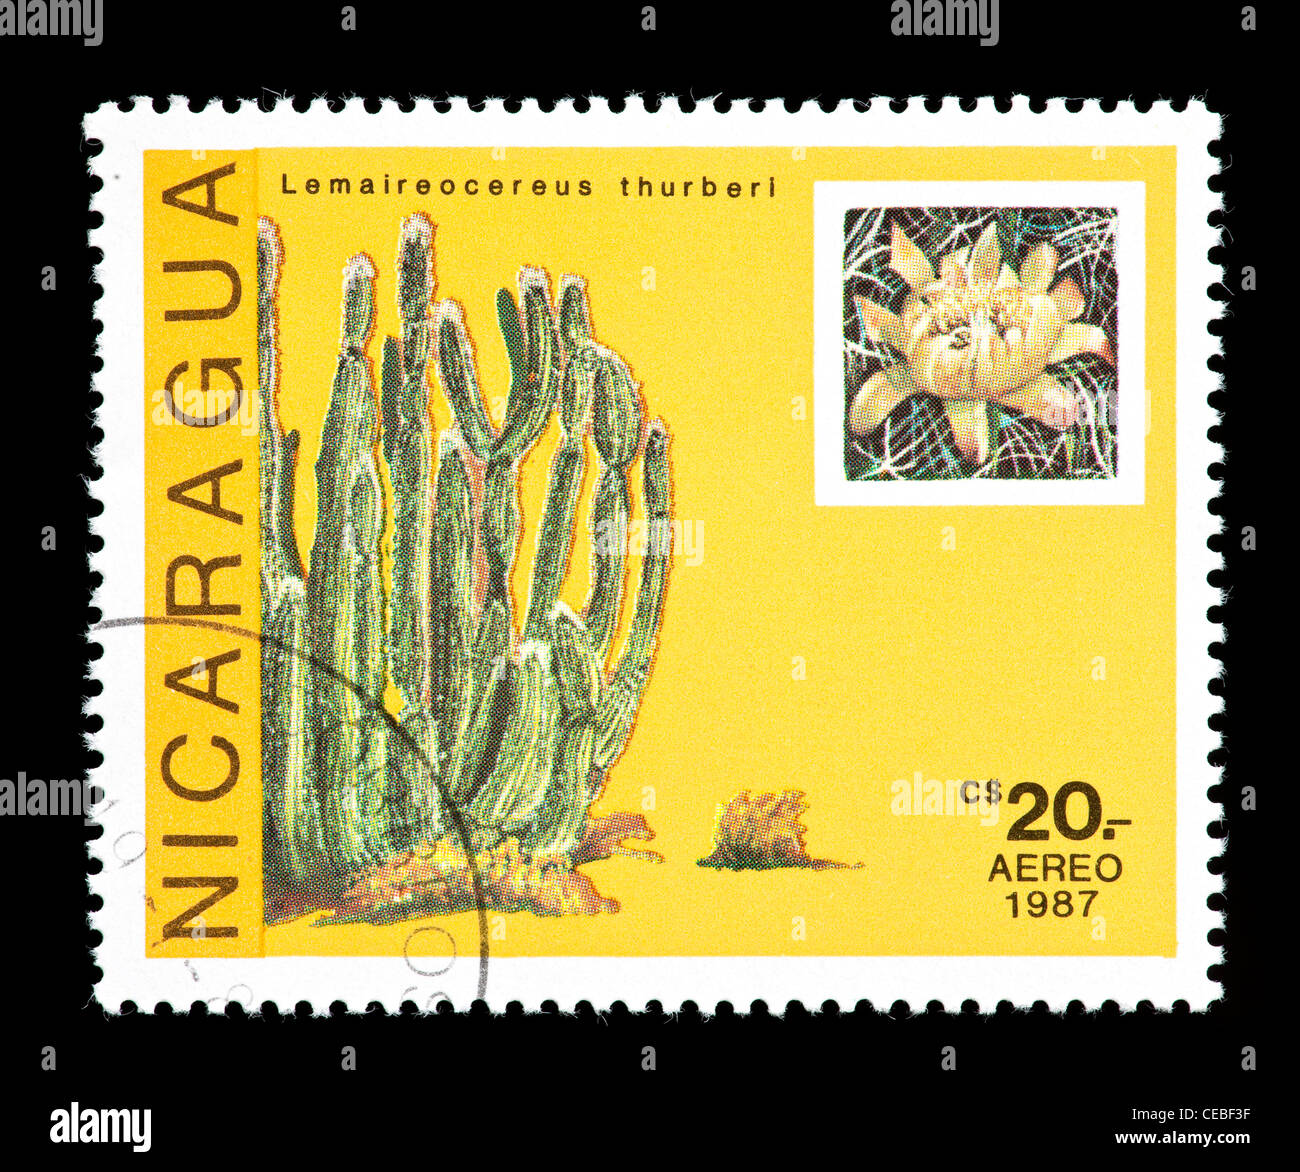 Postage stamp from Nicaragua depicting cacti and flowers (Lemaireocereus thurberi) Stock Photo